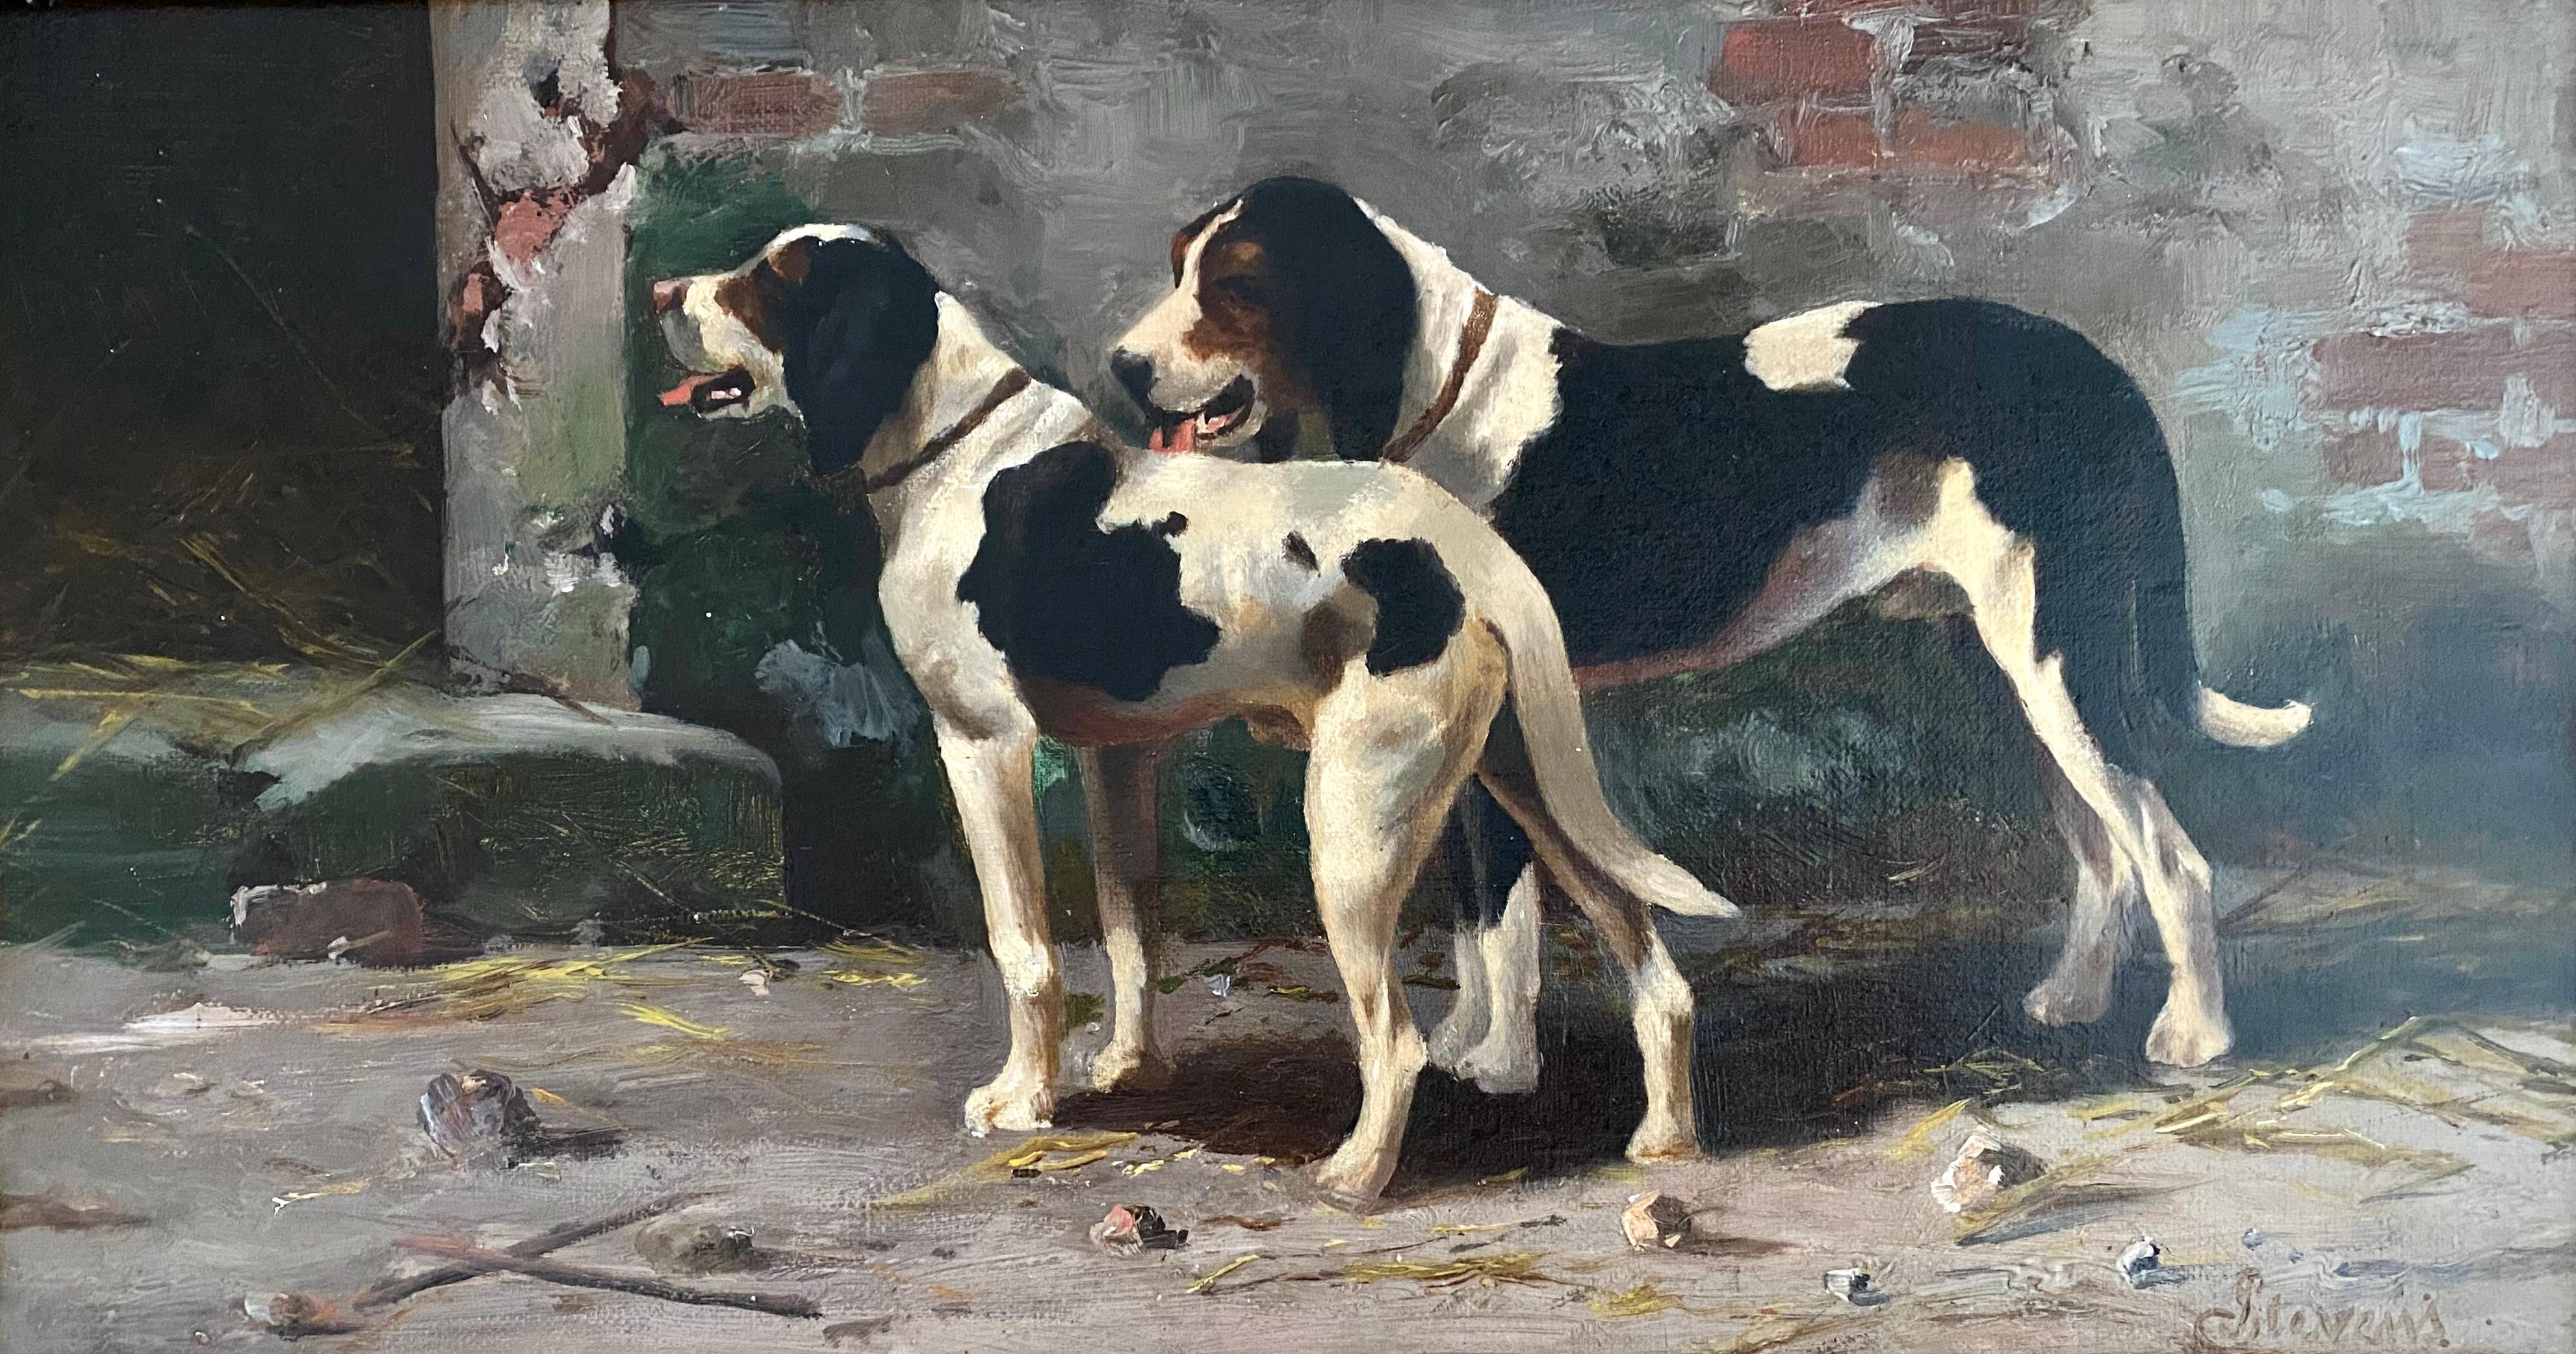 Stevens Joseph
Brussels 1816 – 1892
Belgian Painter

Two Hunting Dogs
Signature: Signed bottom right
Medium: Oil on canvas
Dimensions: Image size 22,50 x 41,50 cm, frame size 35 x 54 cm

Biography: Joseph Édouard Stevens was born in Brussels on